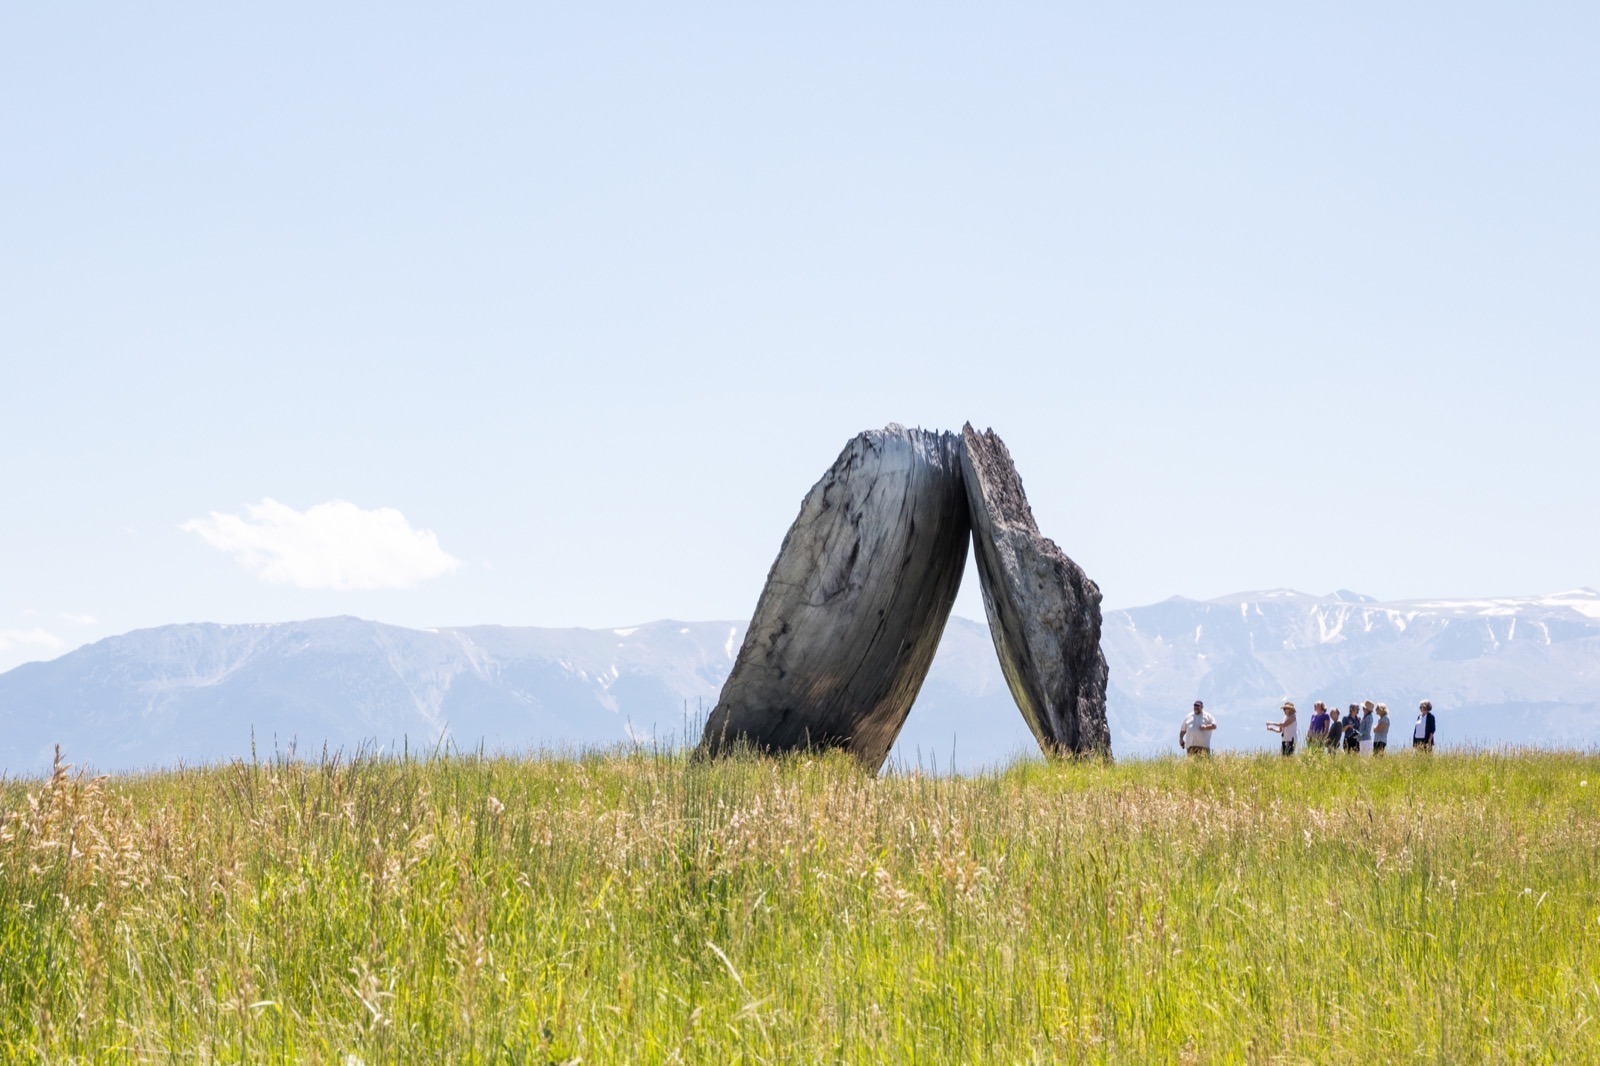 Structure at Tippet Rise Art Center